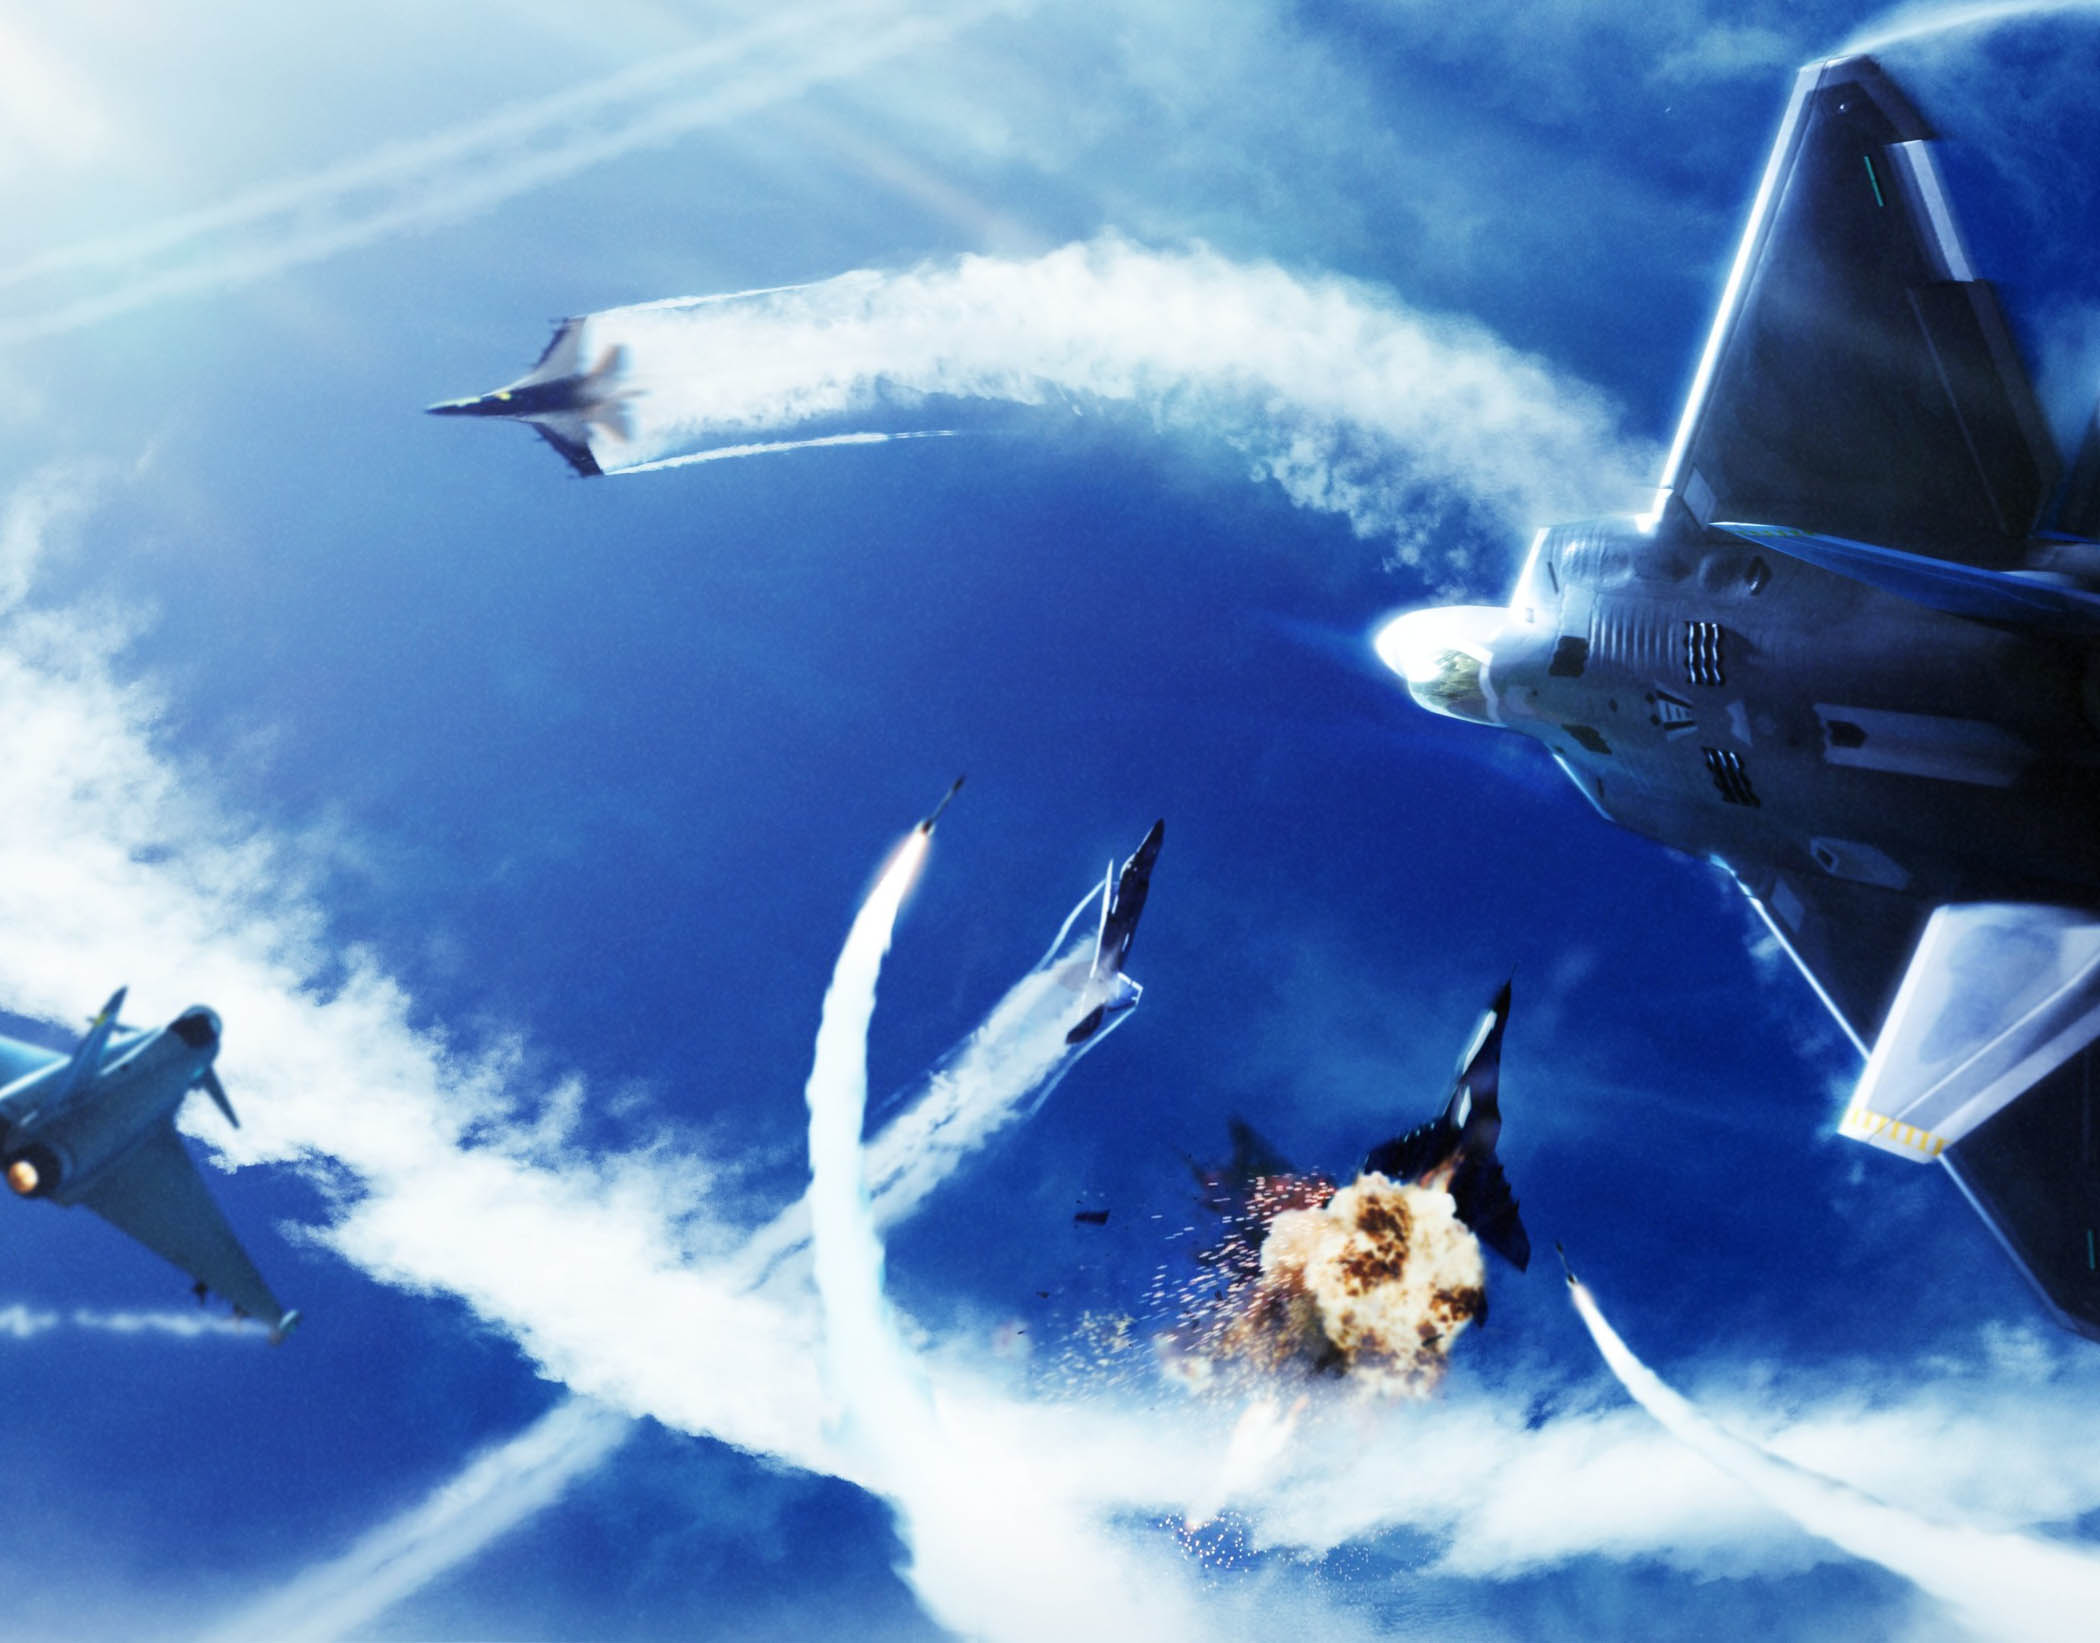 Amazing Ace Combat Pictures & Backgrounds